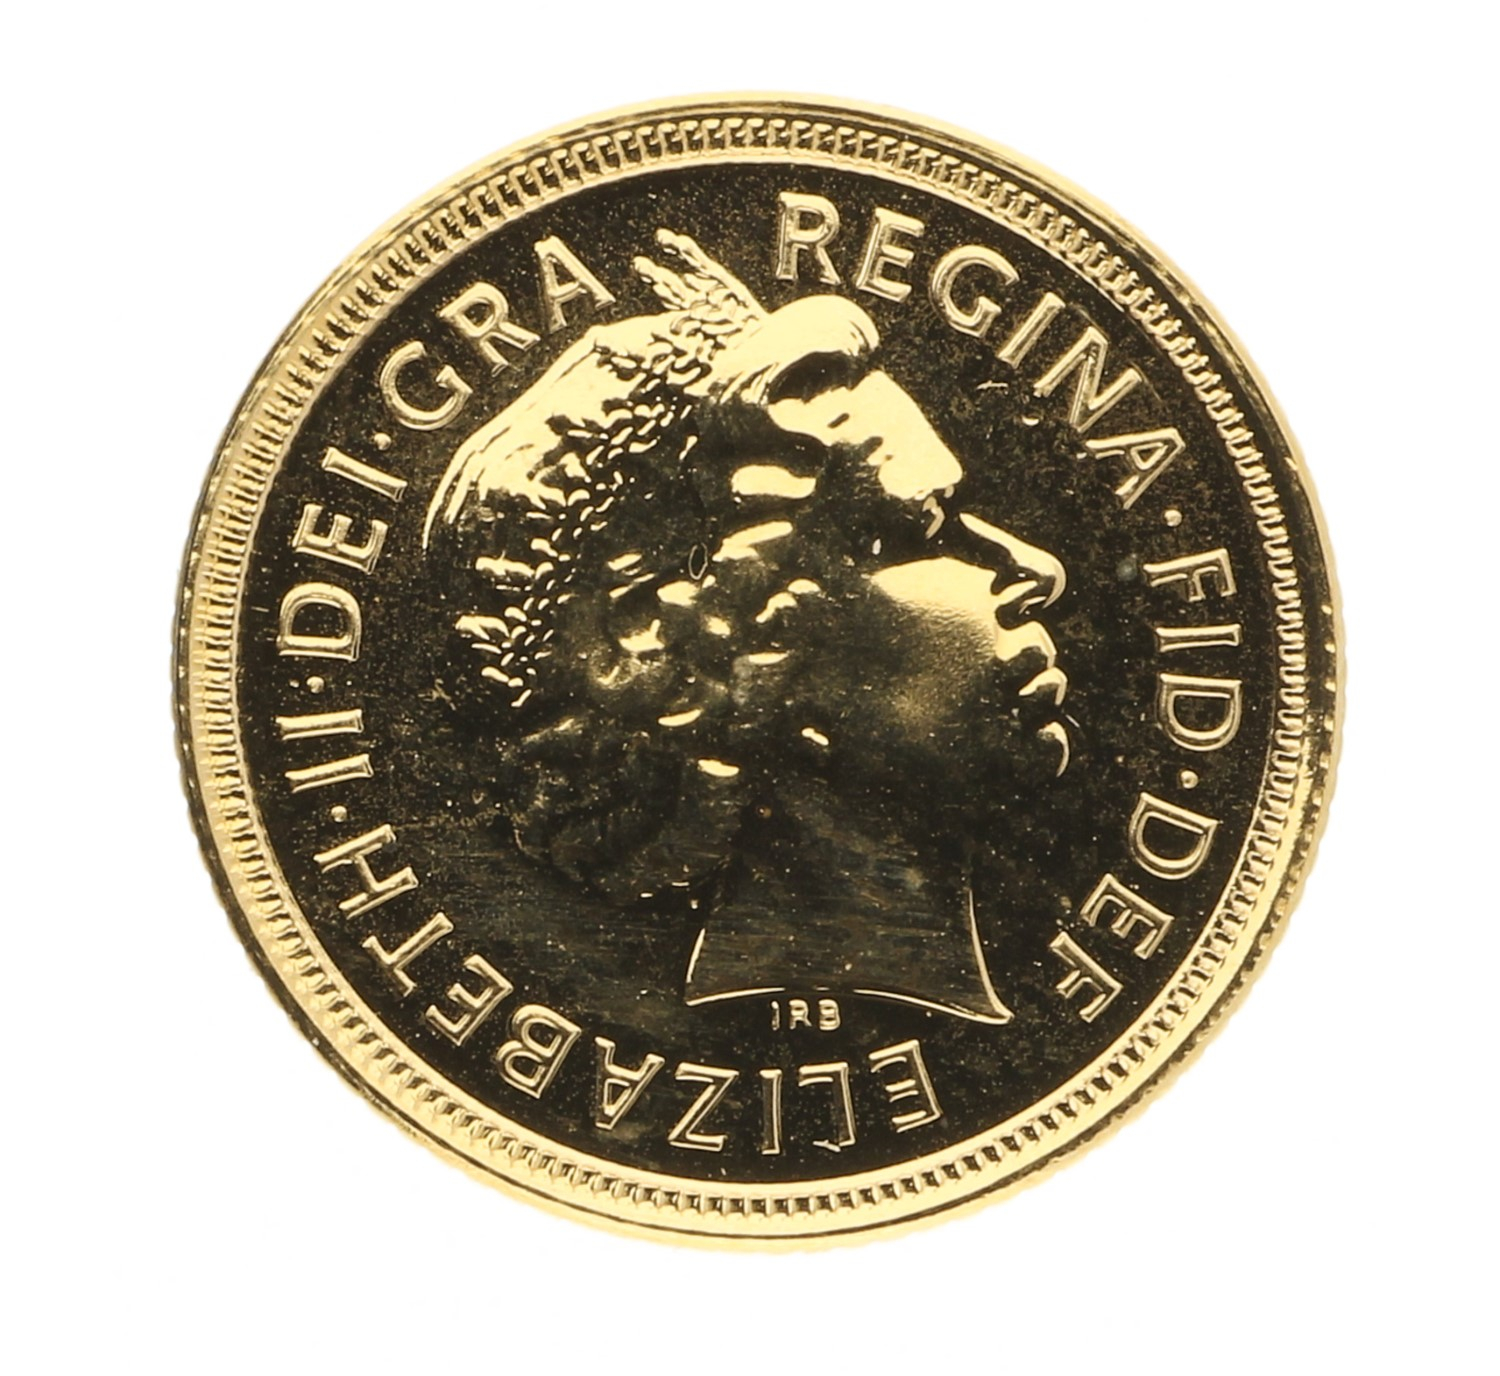 1/2 Sovereign - Great Britain - 2004